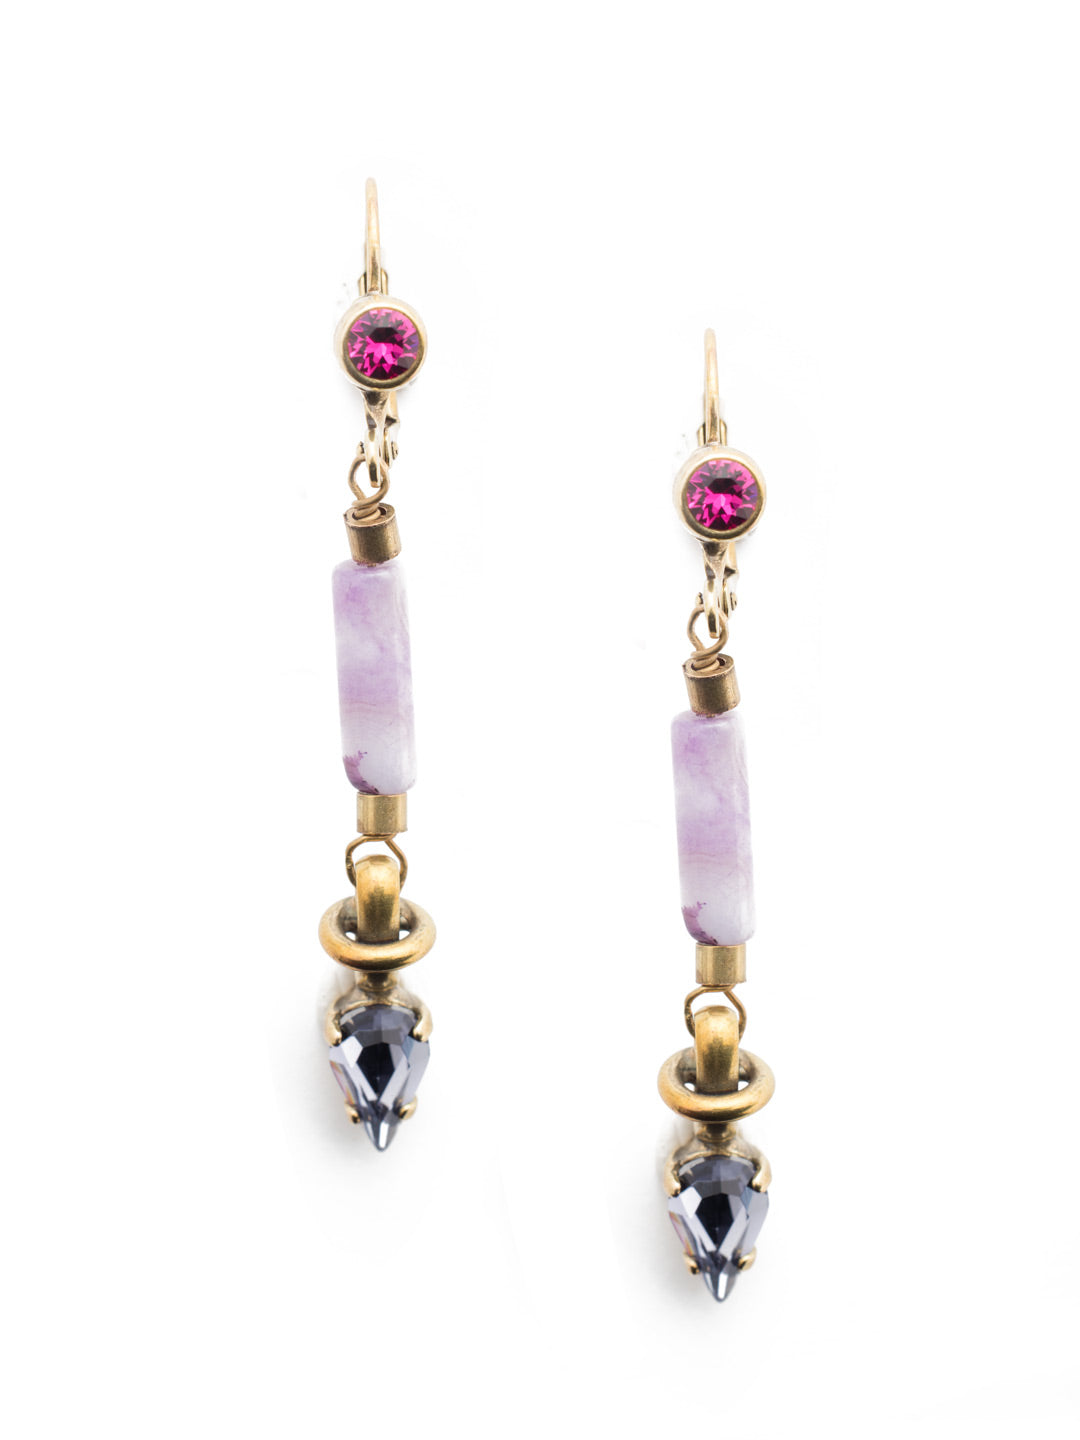 Josie Dangle Earrings - EEU7AGDCS - <p>Call them "wow-worthy," because they are. Add our Josie Dangle Earrings to any outfit and the unique beadwork paired with bold metal and sparkling crystals will get you noticed. From Sorrelli's Duchess collection in our Antique Gold-tone finish.</p>